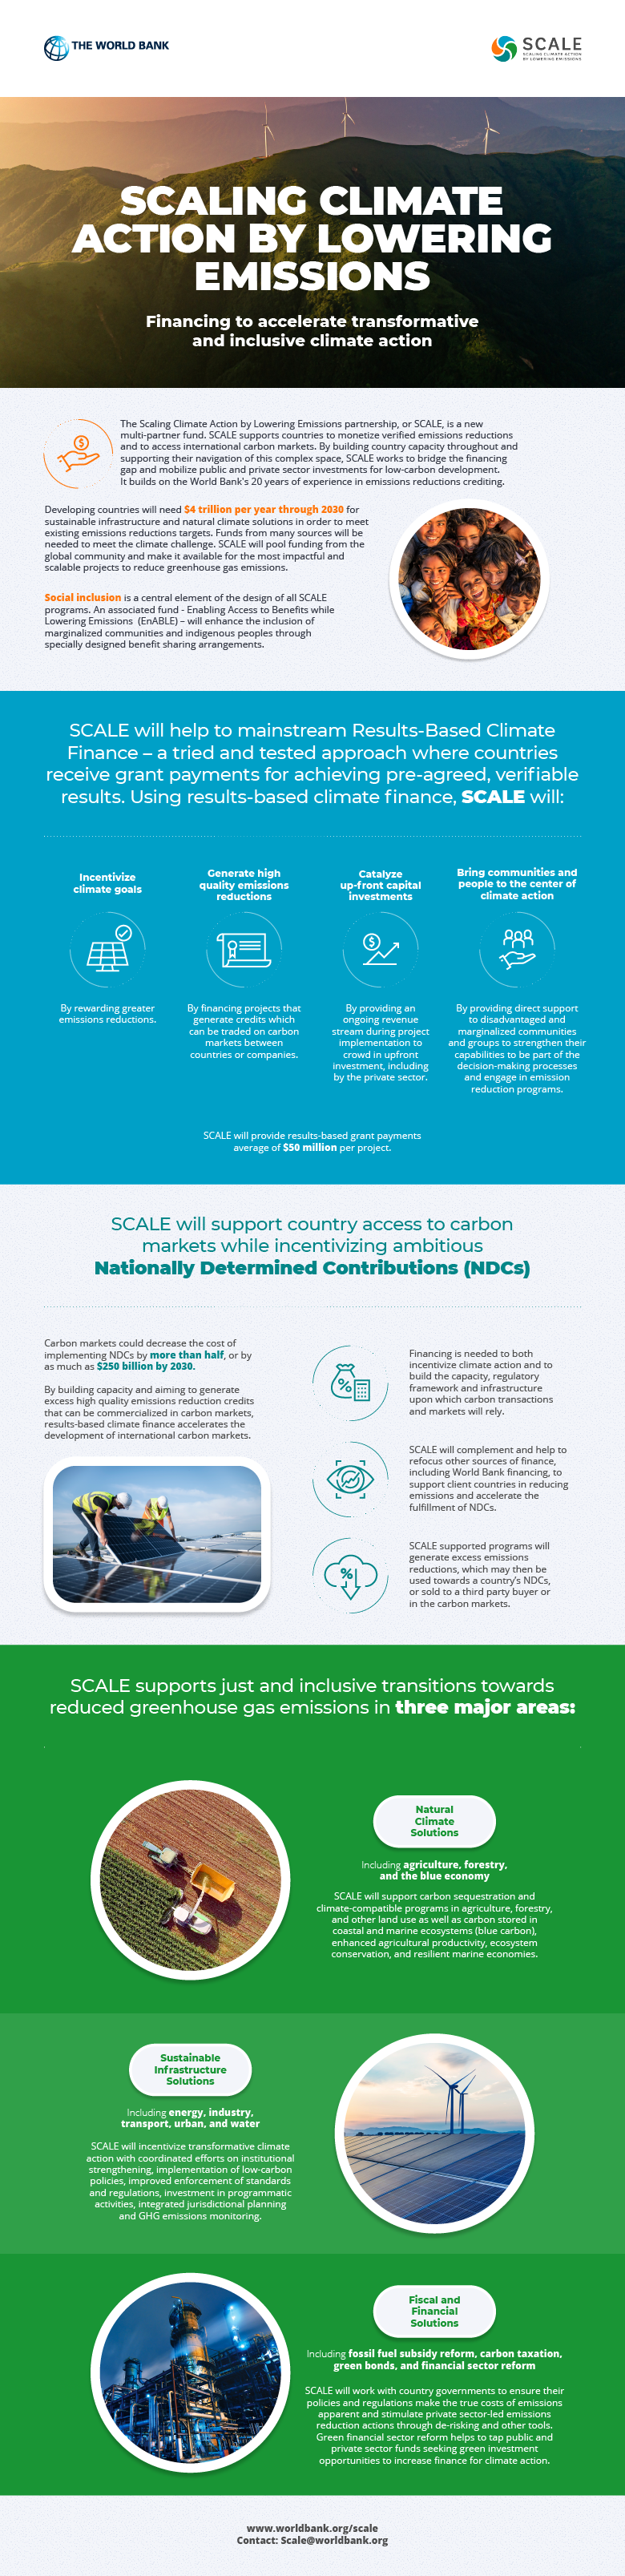 Scaling Climate Action by Lowering Emissions (SCALE) Infographic